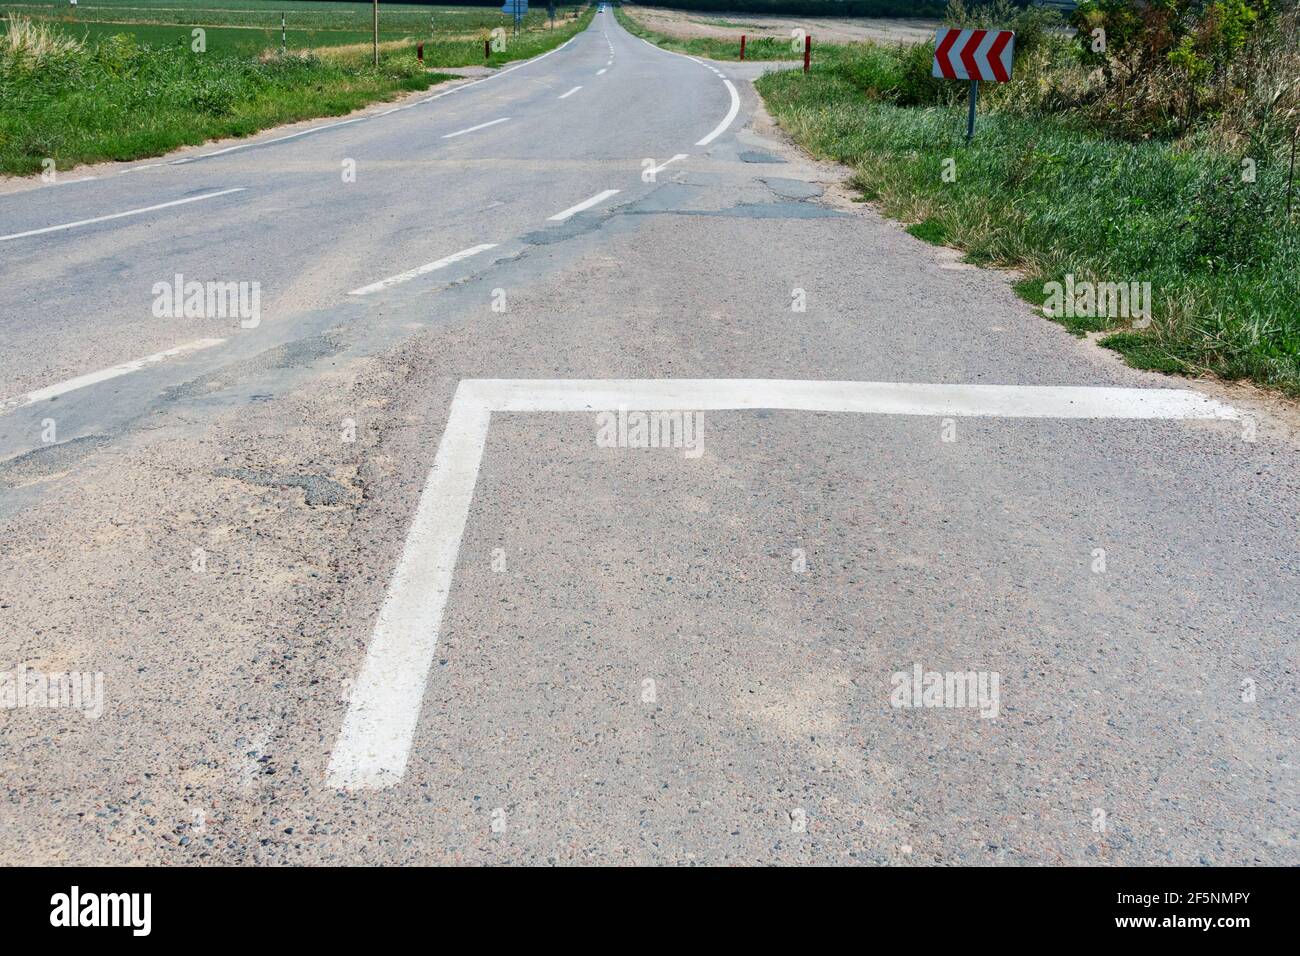 Horizontal road signs on the rural road Stock Photo